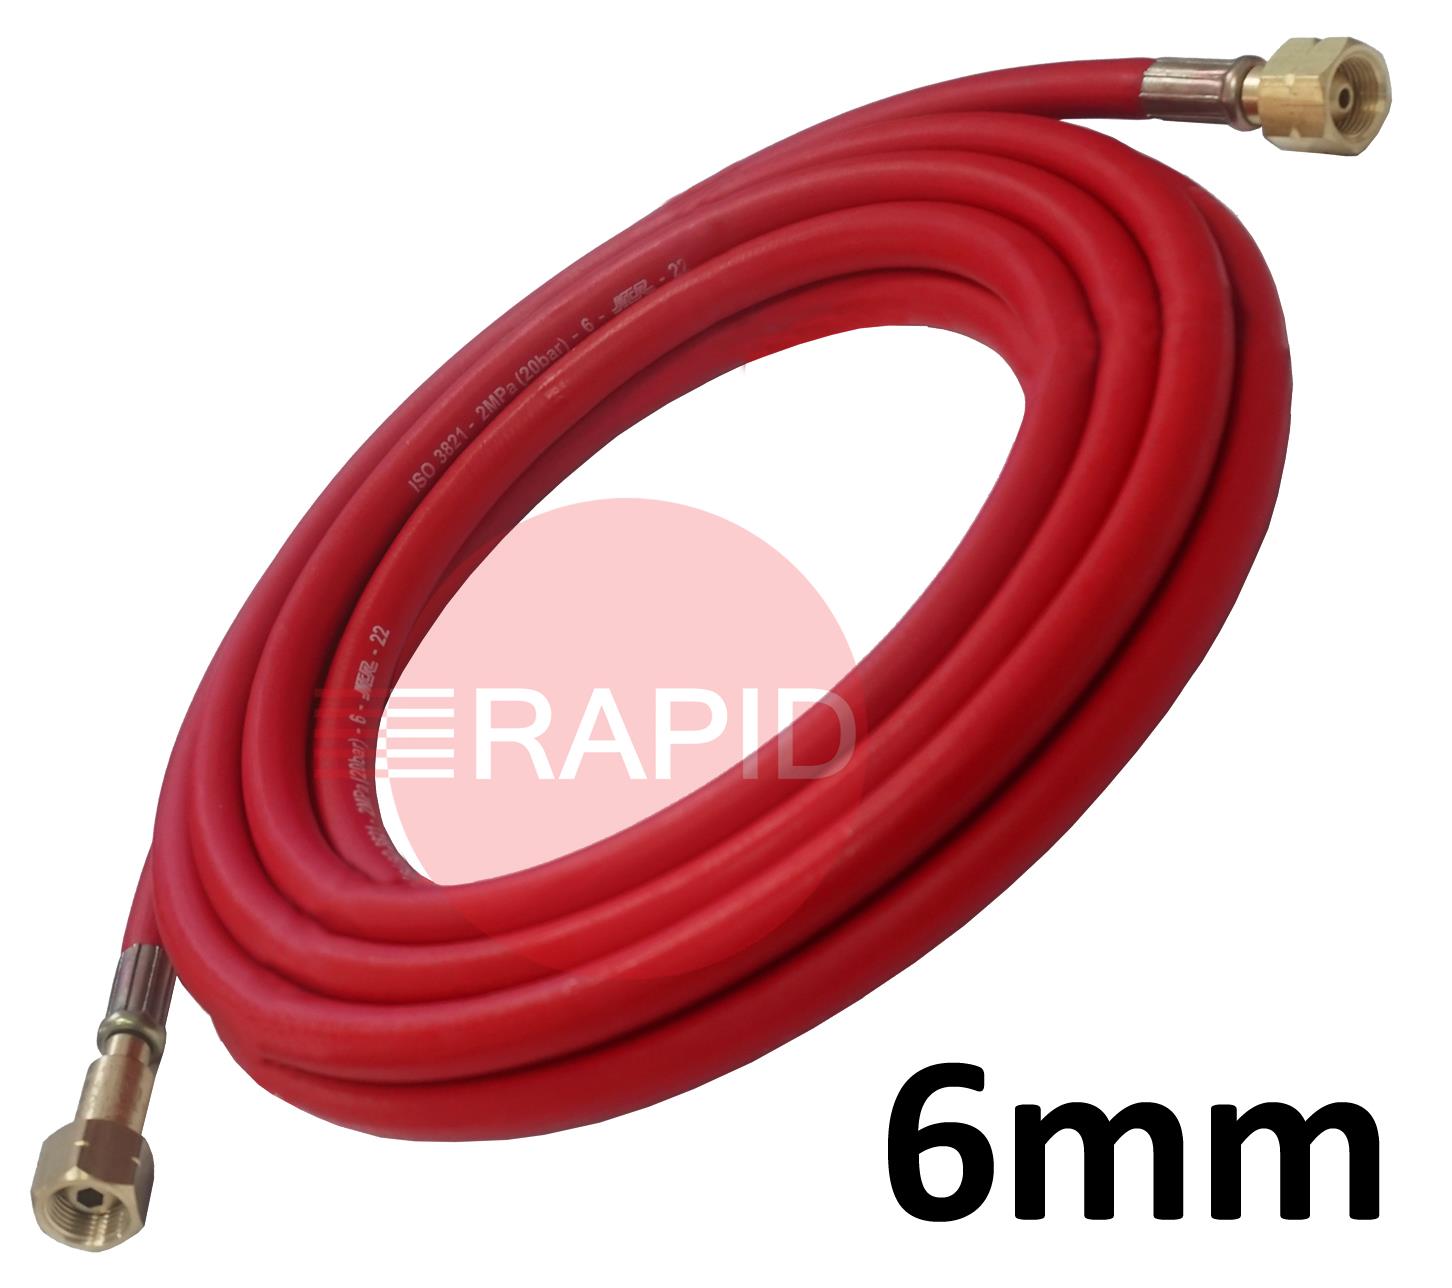 A5123  Fitted Acetylene Hose. 6mm Bore. G3/8 Check Valve & G3/8 Regulator Connection - 5m